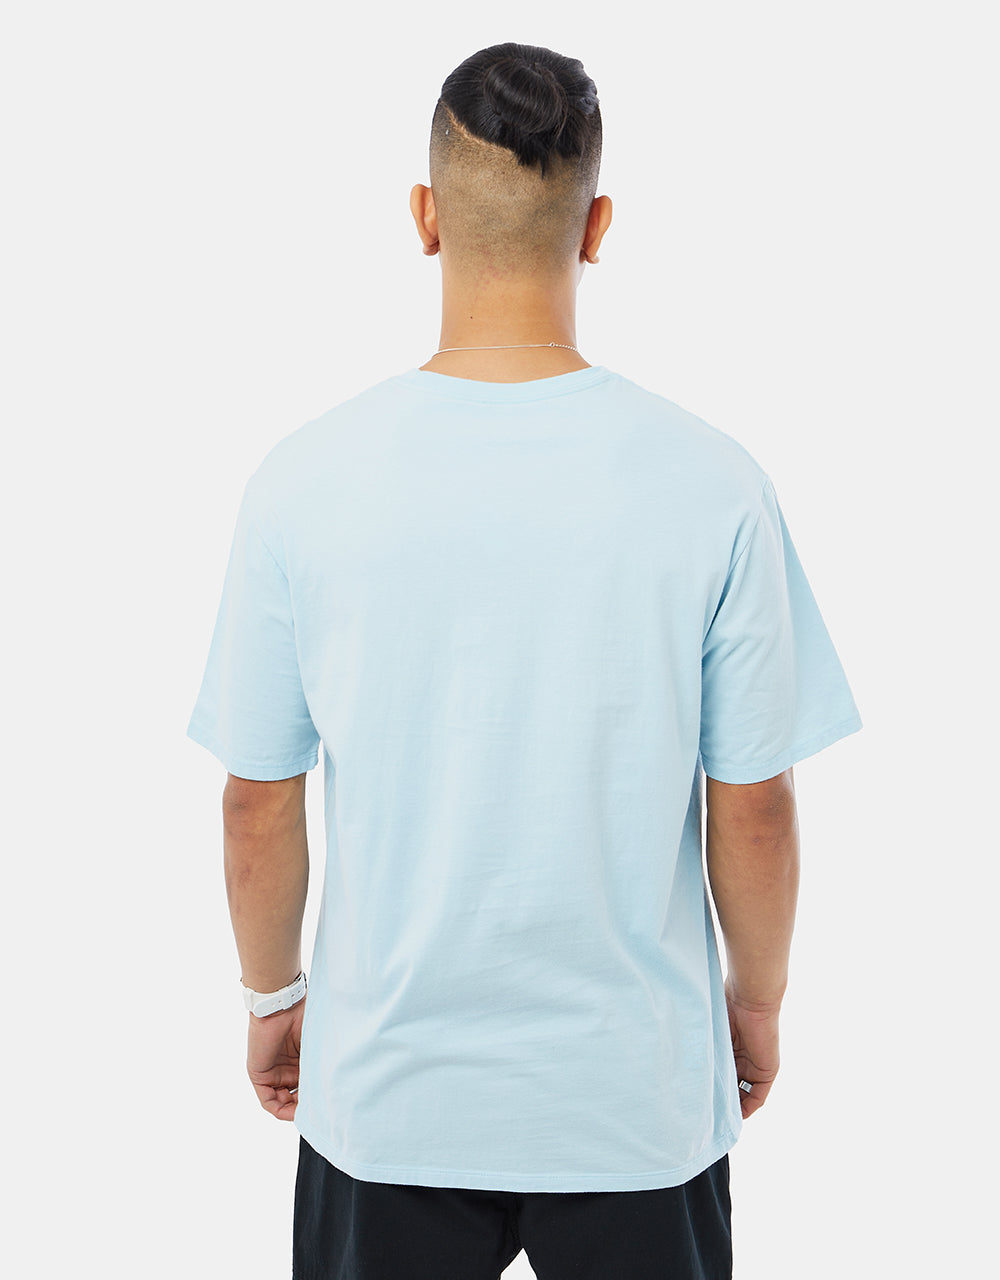 Patagonia Back For Good Organic T-Shirt - Fin Blue